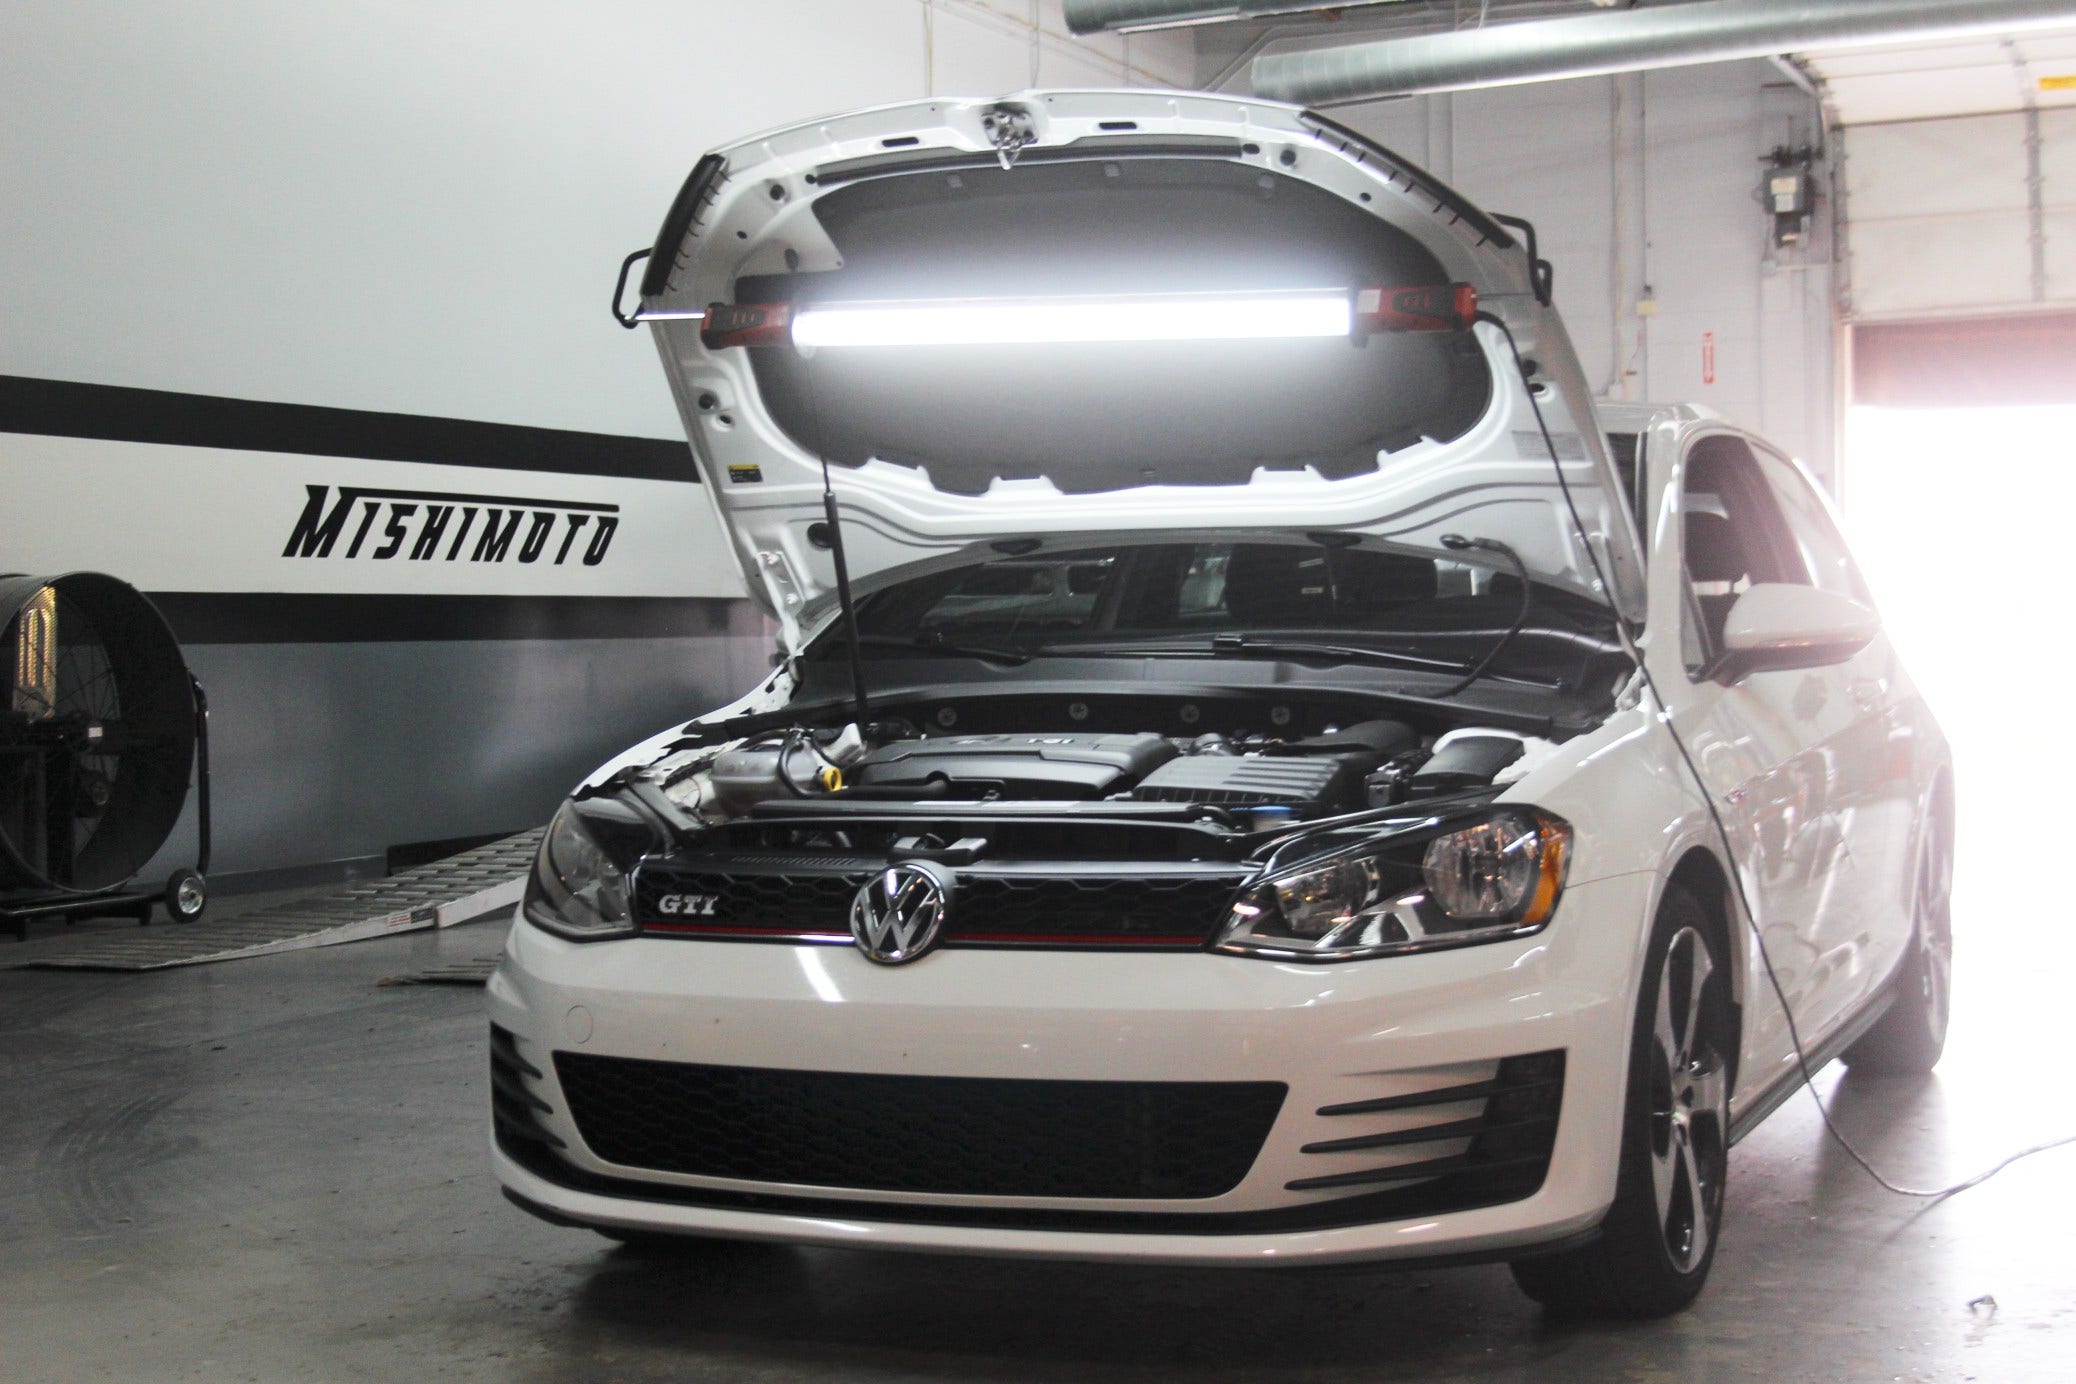 The Stock Intake - MK7 GTI Induction, Part 1